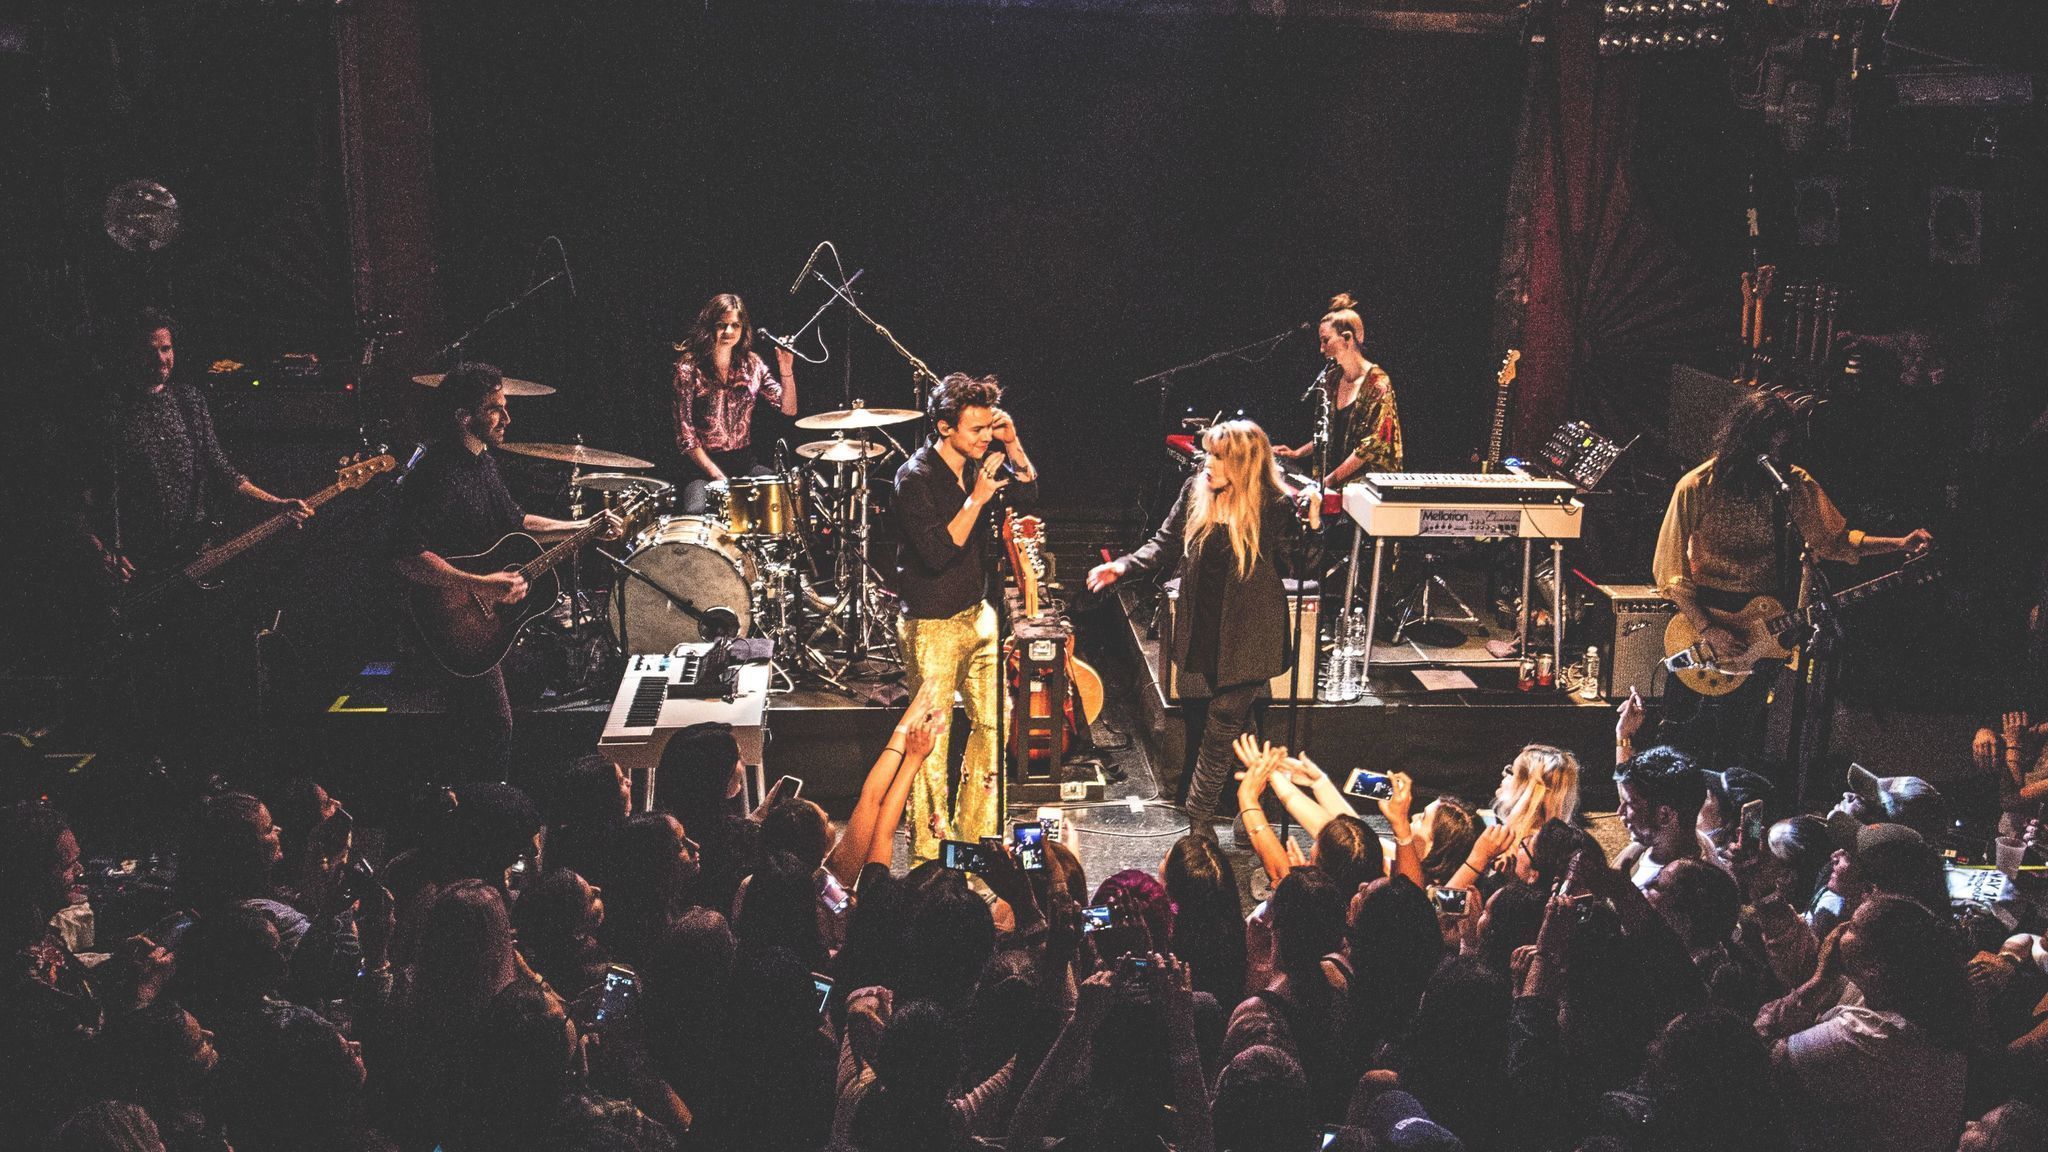 'Wanna do one more?': Harry Styles jams with Stevie Nicks at the Troubadour - LA Times2048 x 1152